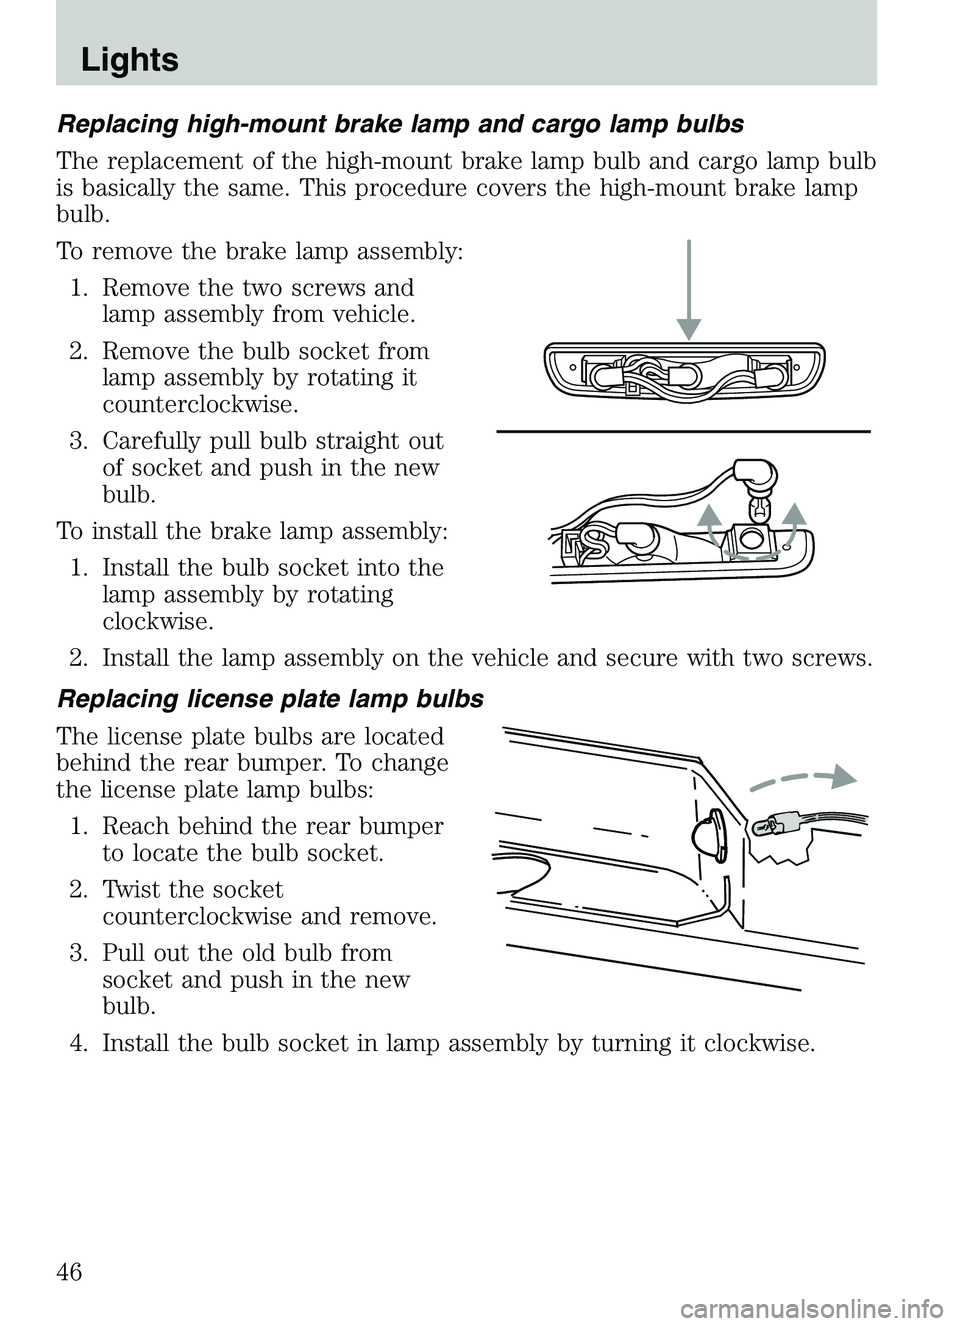 MAZDA MODEL B4000 4WD 2003  Owners Manual Replacing high-mount brake lamp and cargo lamp bulbs
The replacement of the high-mount brake lamp bulb and cargo lamp bulb
is basically the same. This procedure covers the high-mount brake lamp
bulb.
